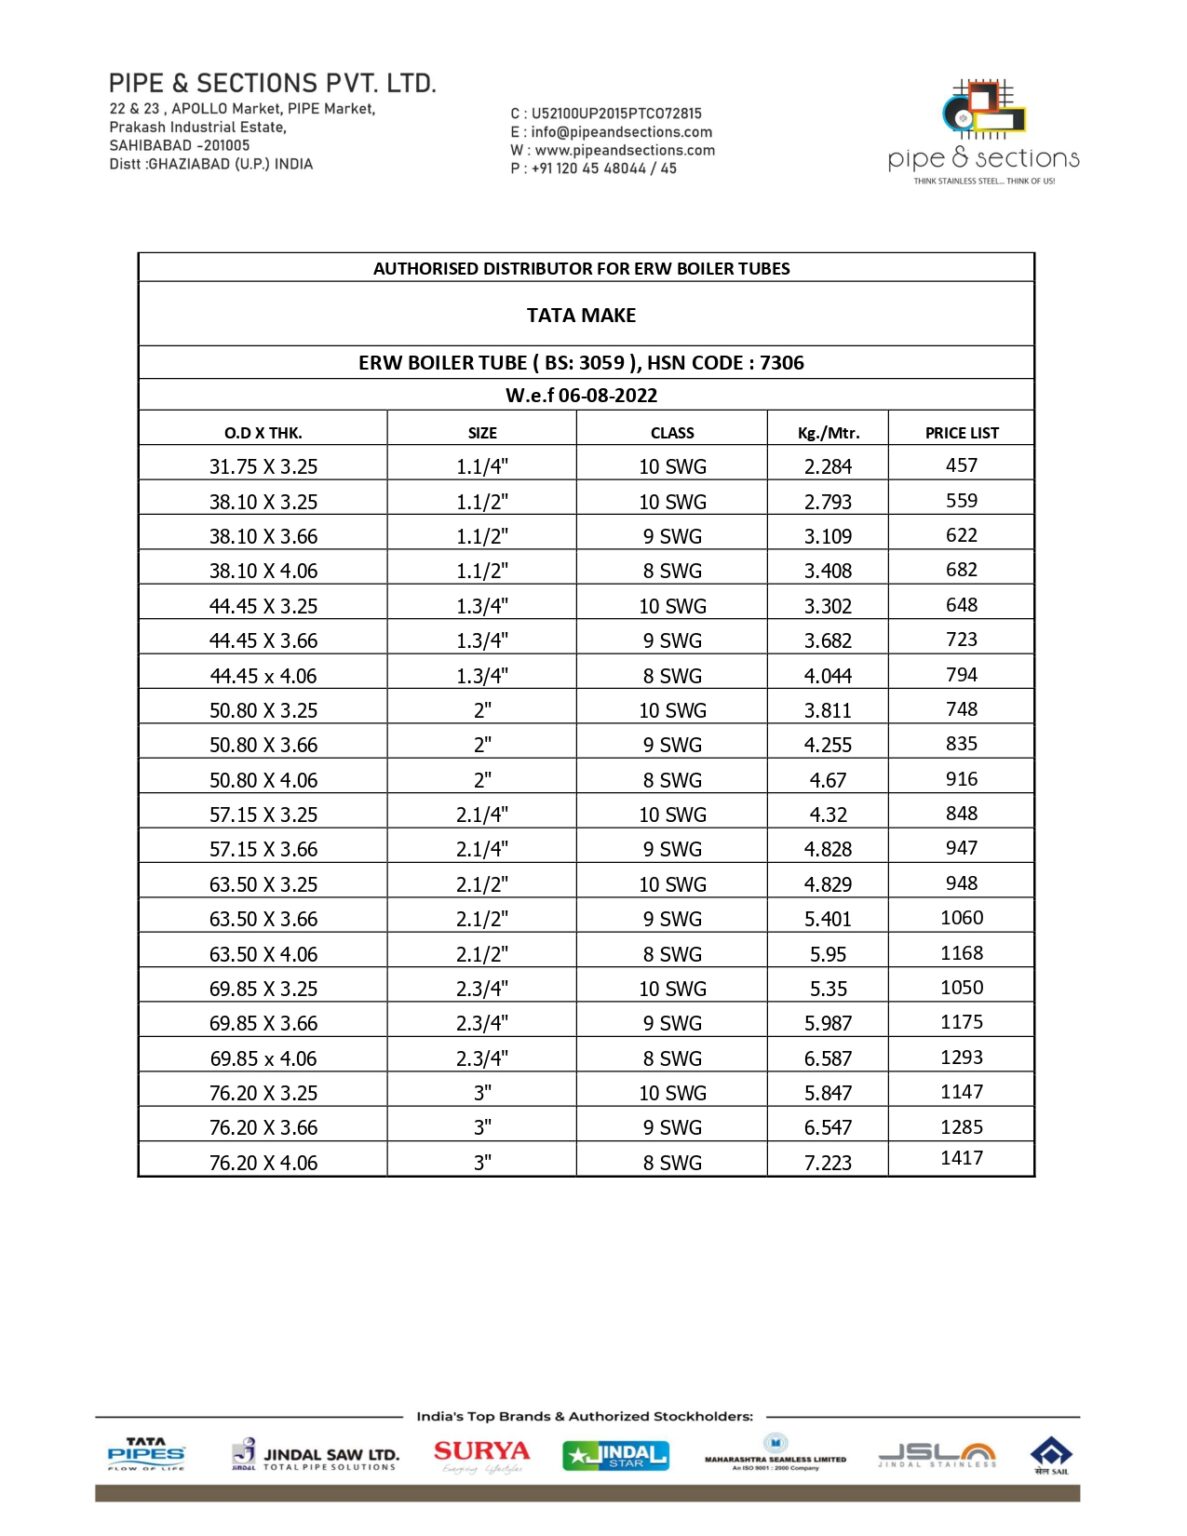 M.S ERW BOILER TUBES PRICE LIST - Pipe and Sections